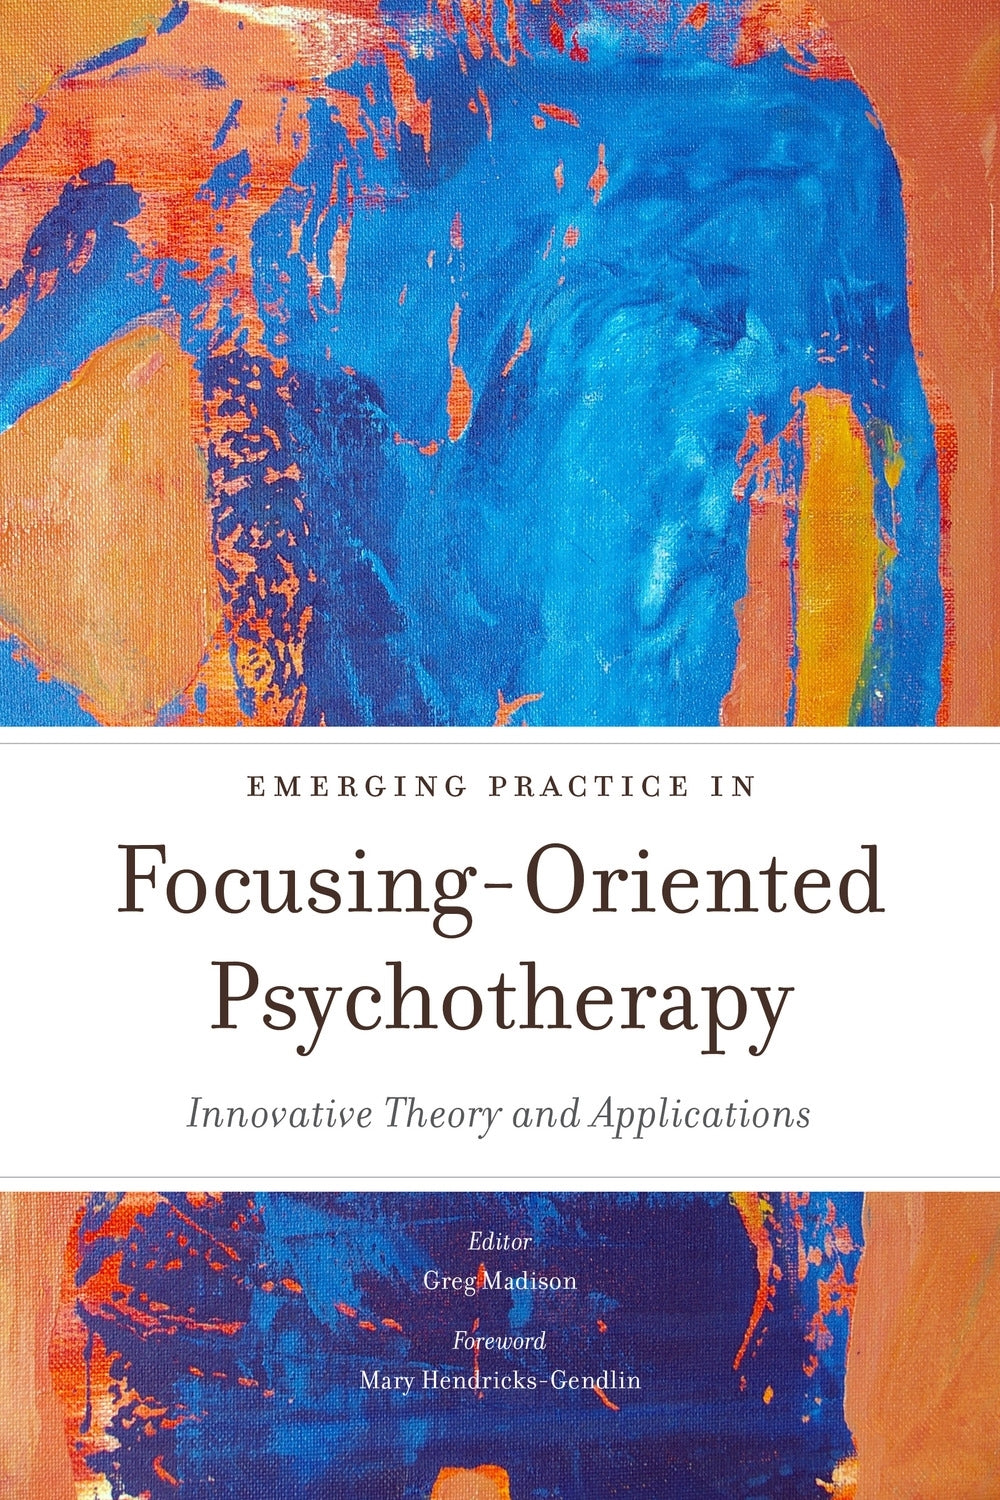 Emerging Practice in Focusing-Oriented Psychotherapy by Mary Hendricks Gendlin, Greg Madison, No Author Listed